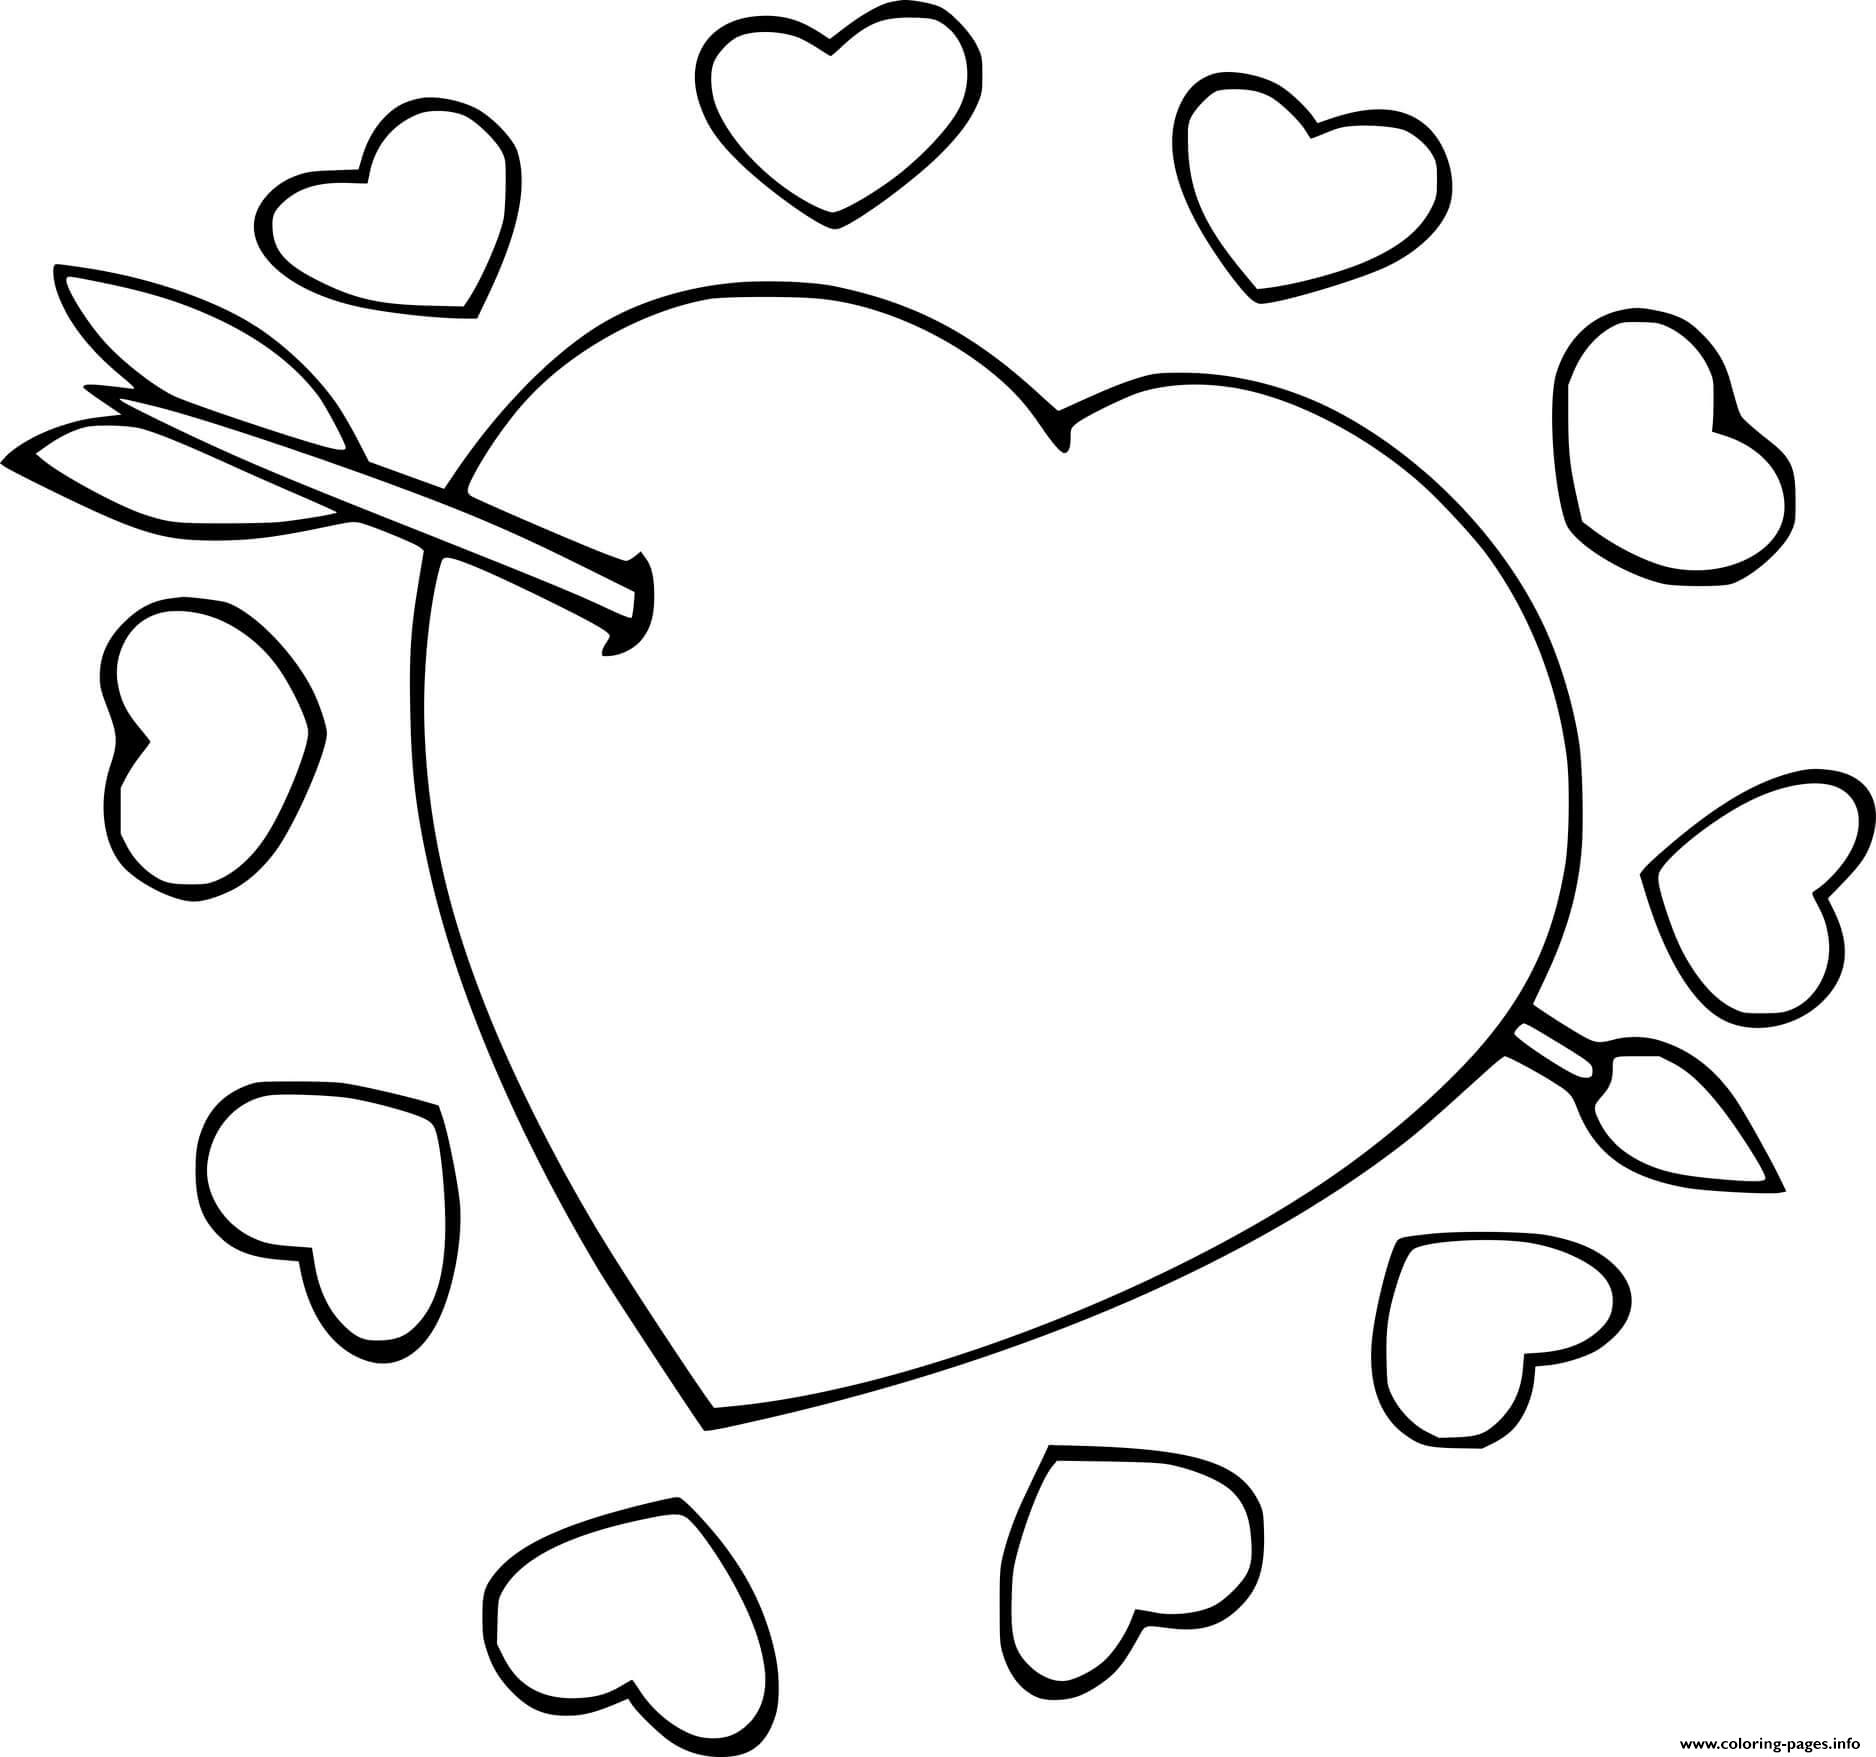 One Big Heart And Ten Small Hearts coloring